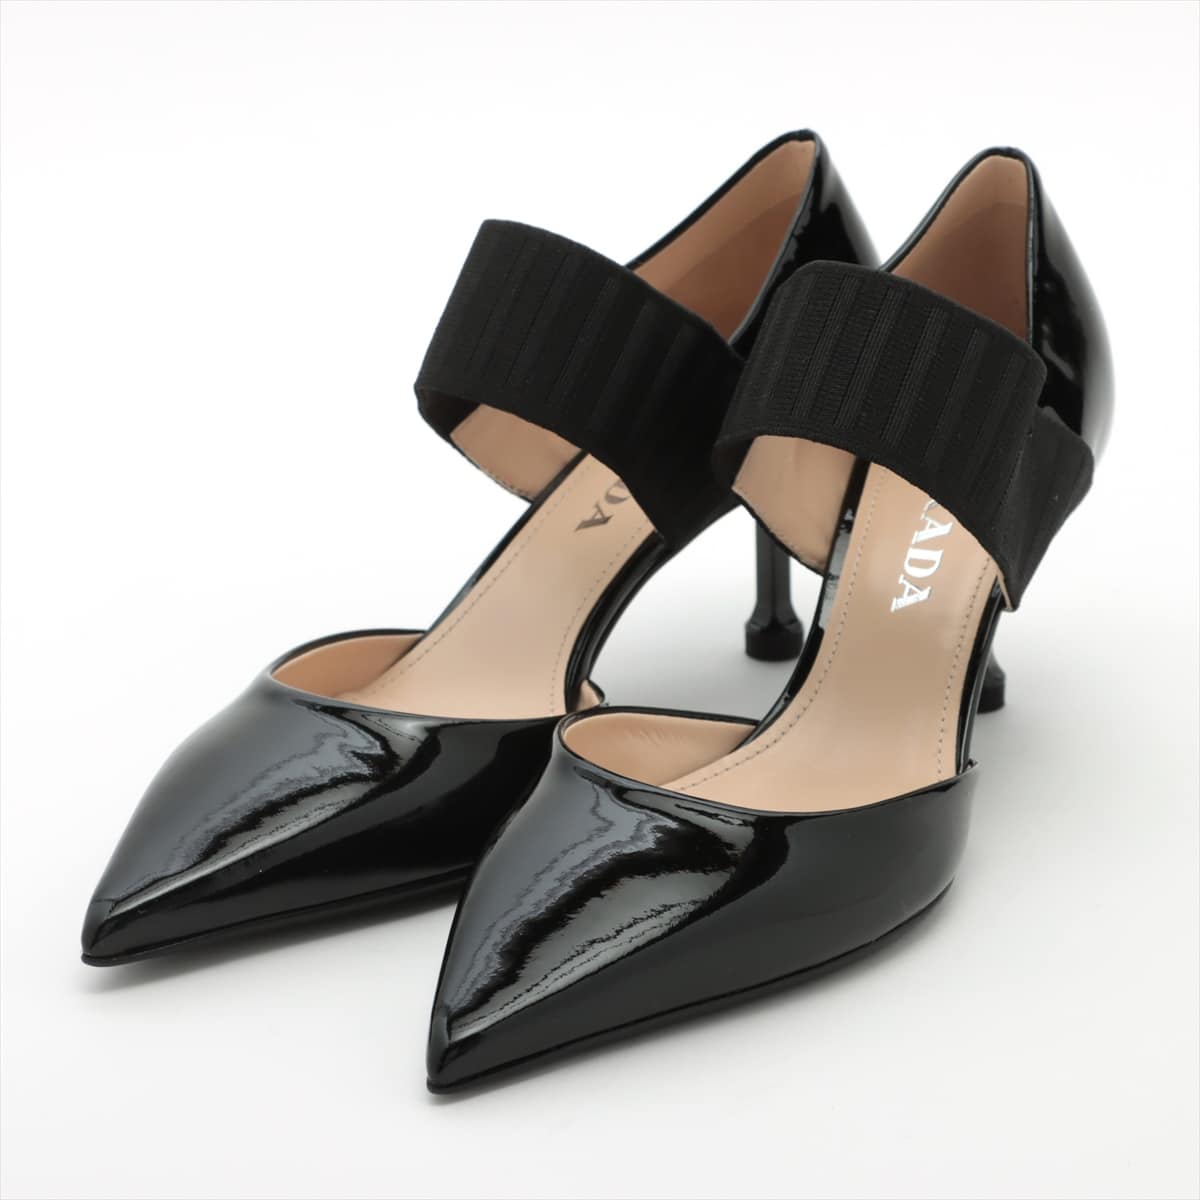 Prada Patent leather Pumps 36 1/2 Ladies' Black There is a box